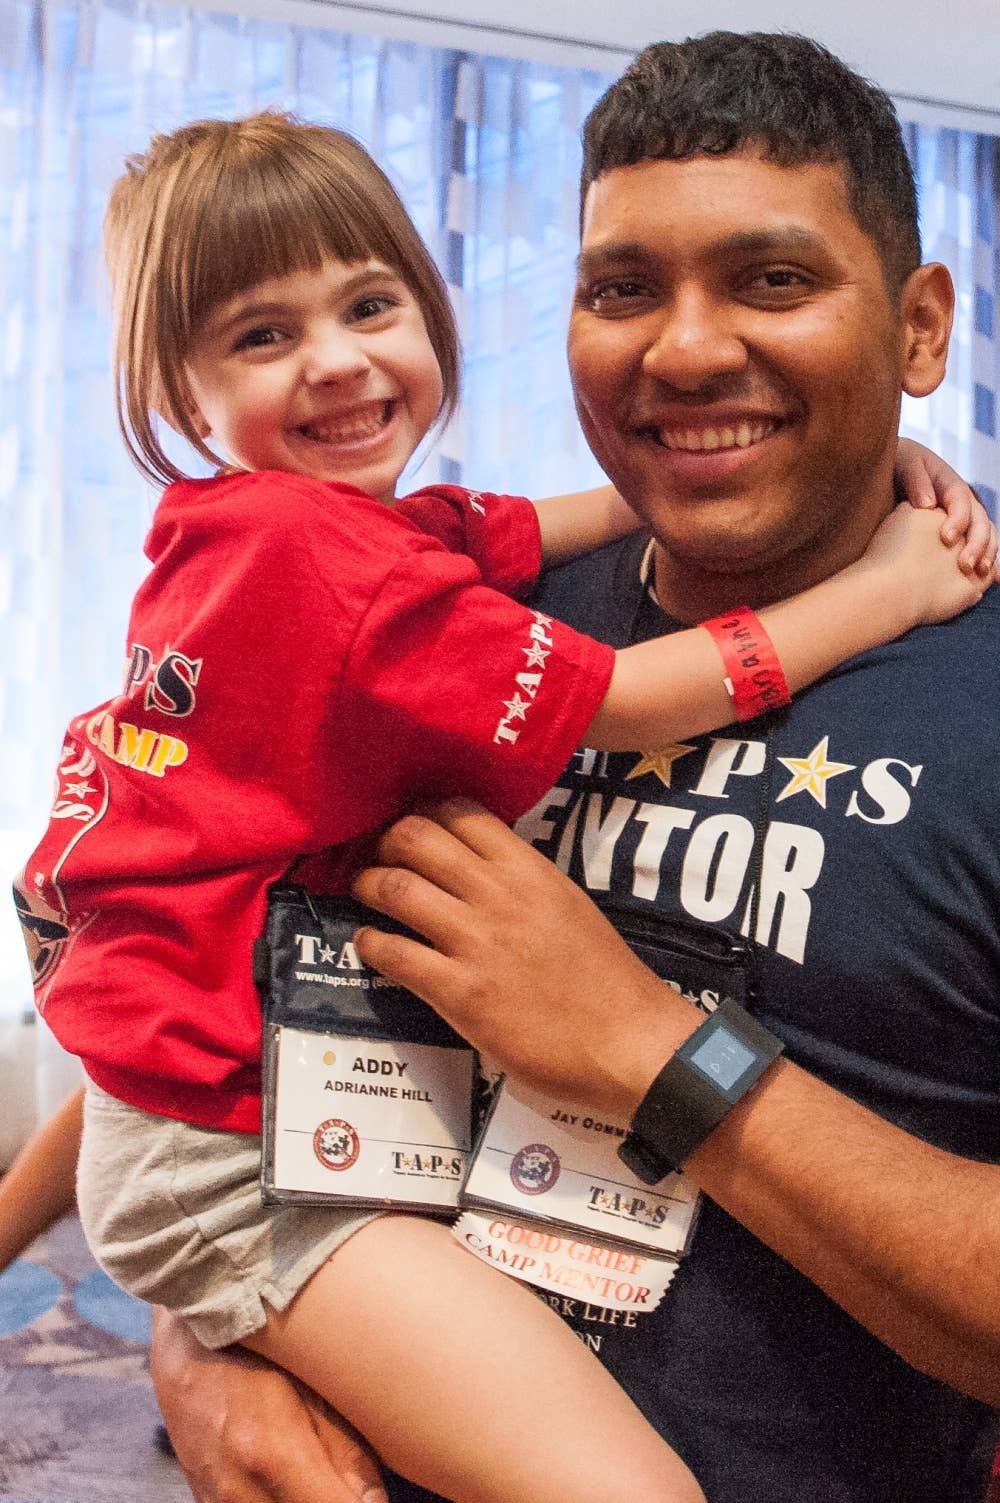 A Gold Star child and her mentor pose for a photo during the 21st annual TAPS National Military Survivor Seminar and Good Grief Camp for Young Survivors, in Arlington, Va., May 22, 2015. Gen. Dempsey addressed surviving family members of fallen service members from both behind a podium and behind a microphone as he sang a few songs. DoD photo/Daniel Hinton